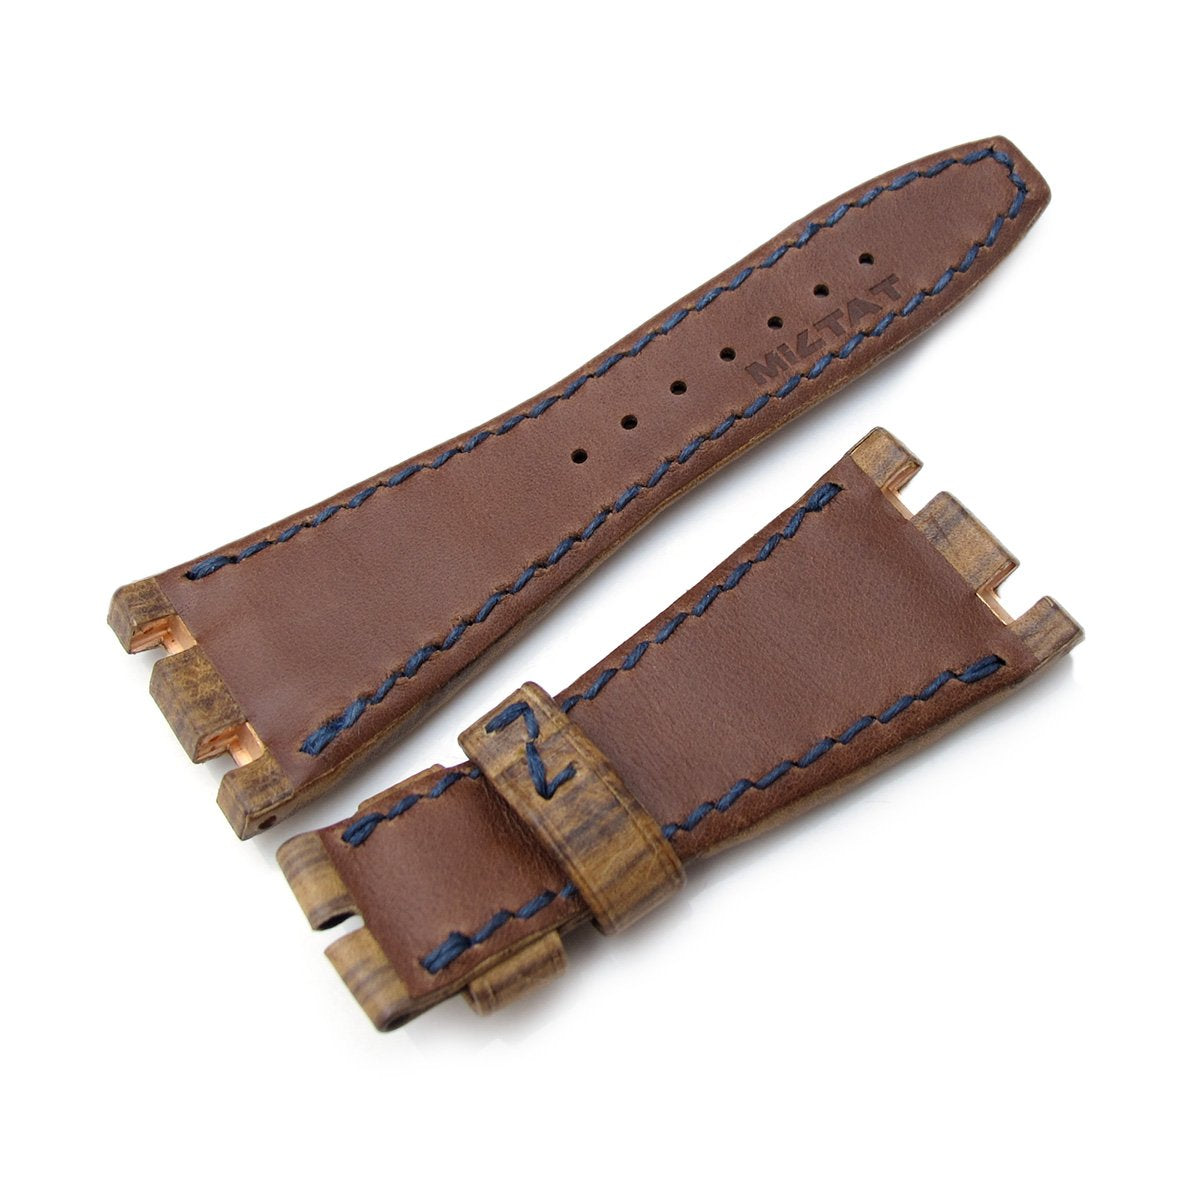  Authentic Leather Replacement Shoulder Strap, Brass Tone (Gold  Tone) Metal Buckles, 1.18x24.8(W*L) (Brown) : Arts, Crafts & Sewing